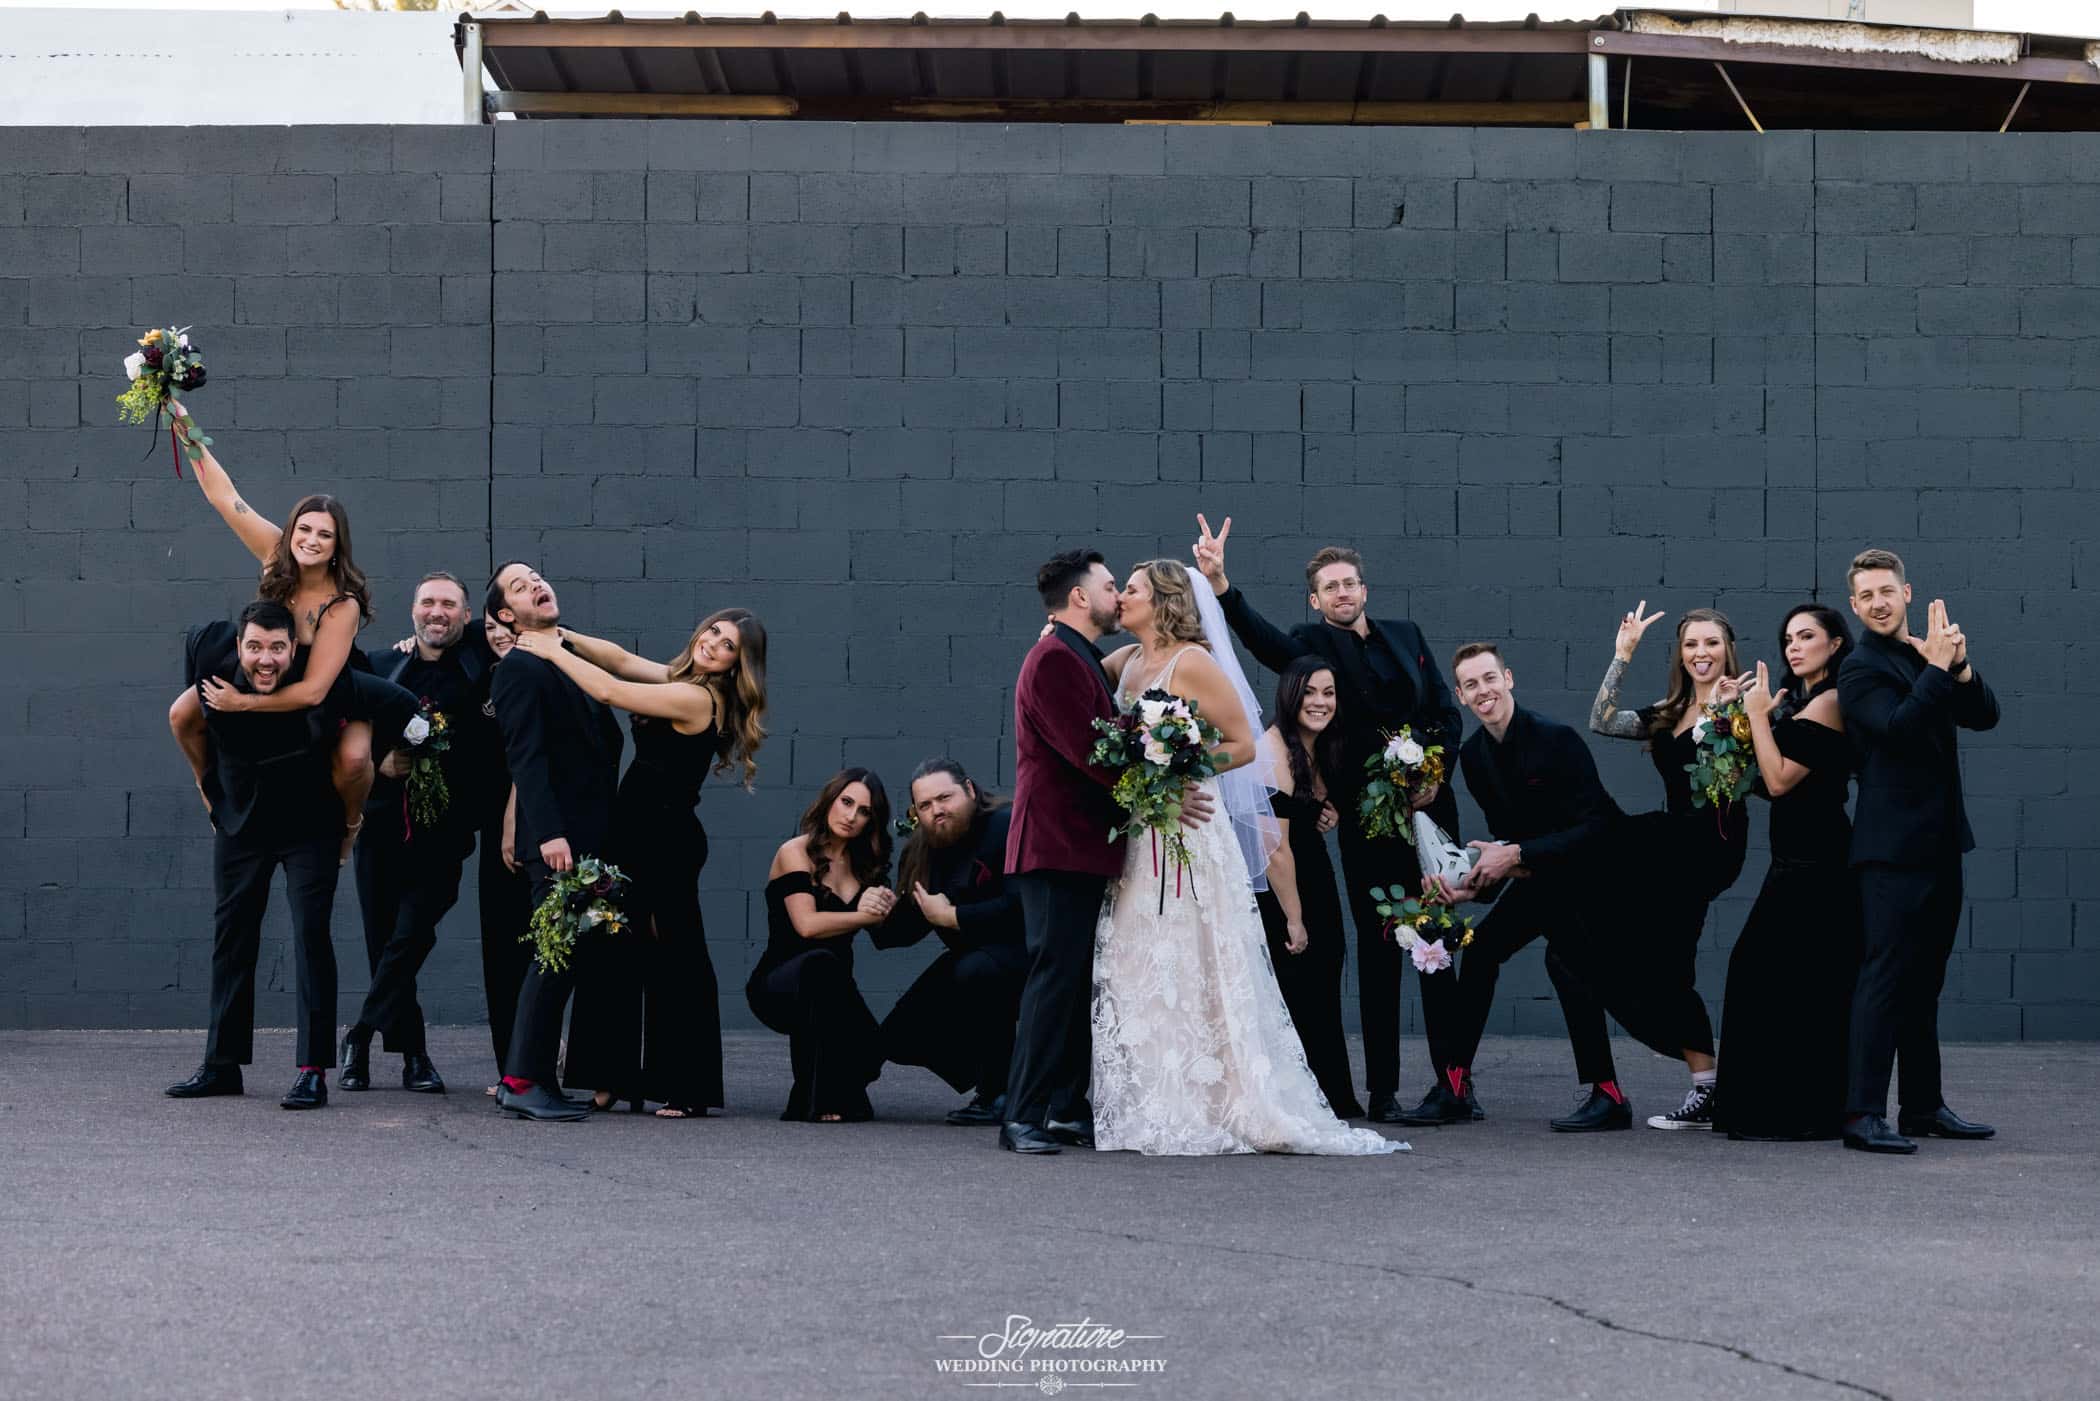 Bride and groom kissing in front of wedding party doing fun pose